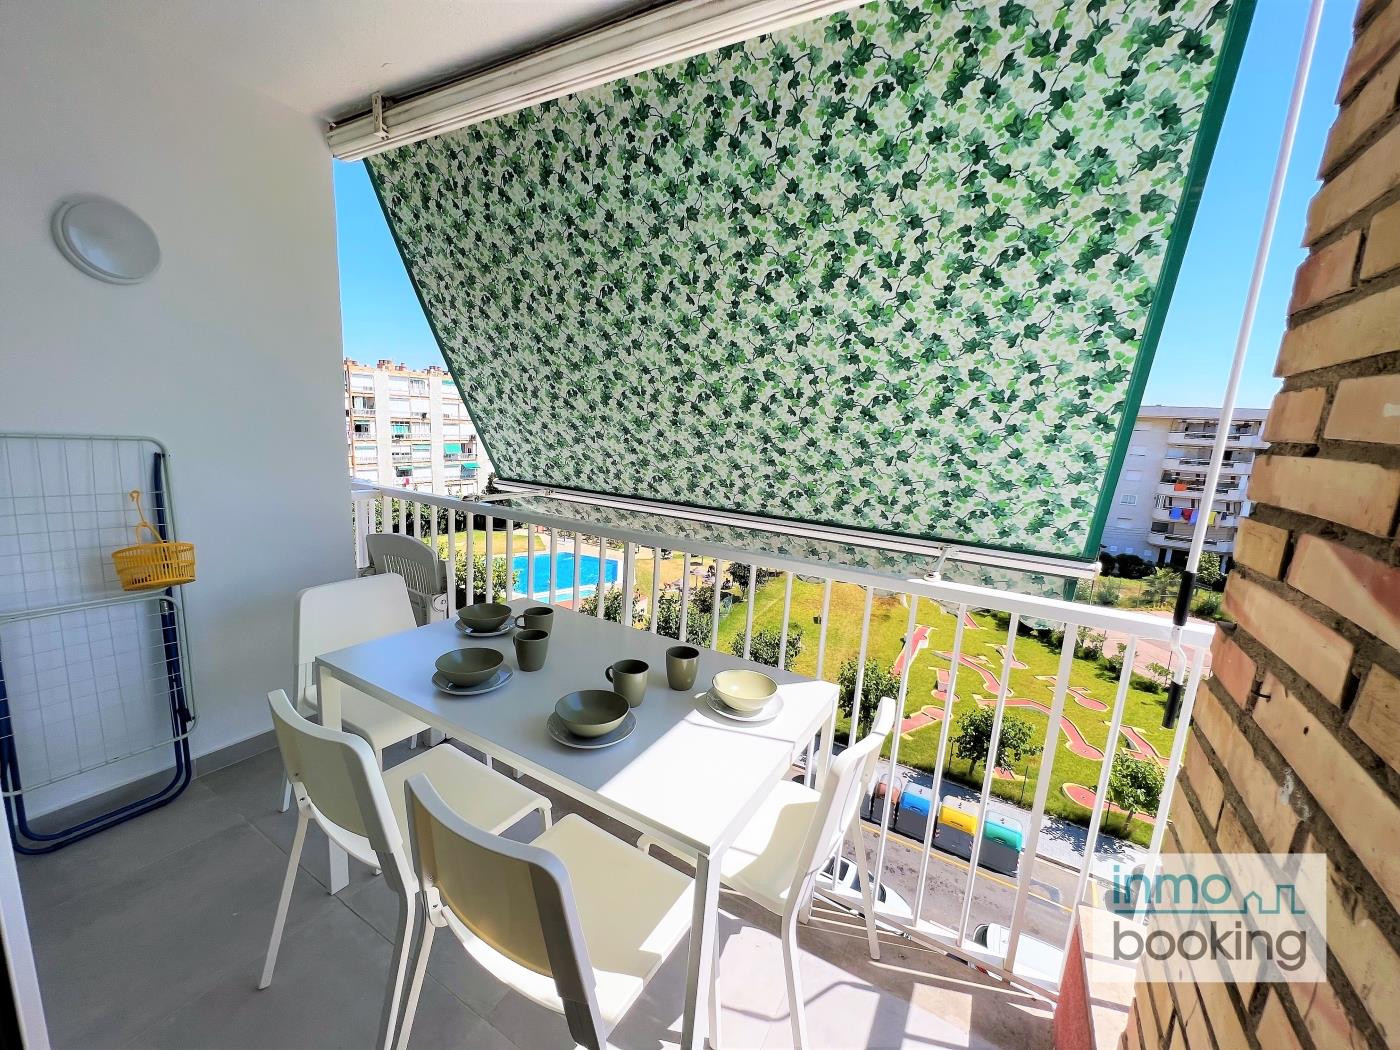 InmoBooking Loft Ancora, 5 minutes walk from the beach. in La Pineda